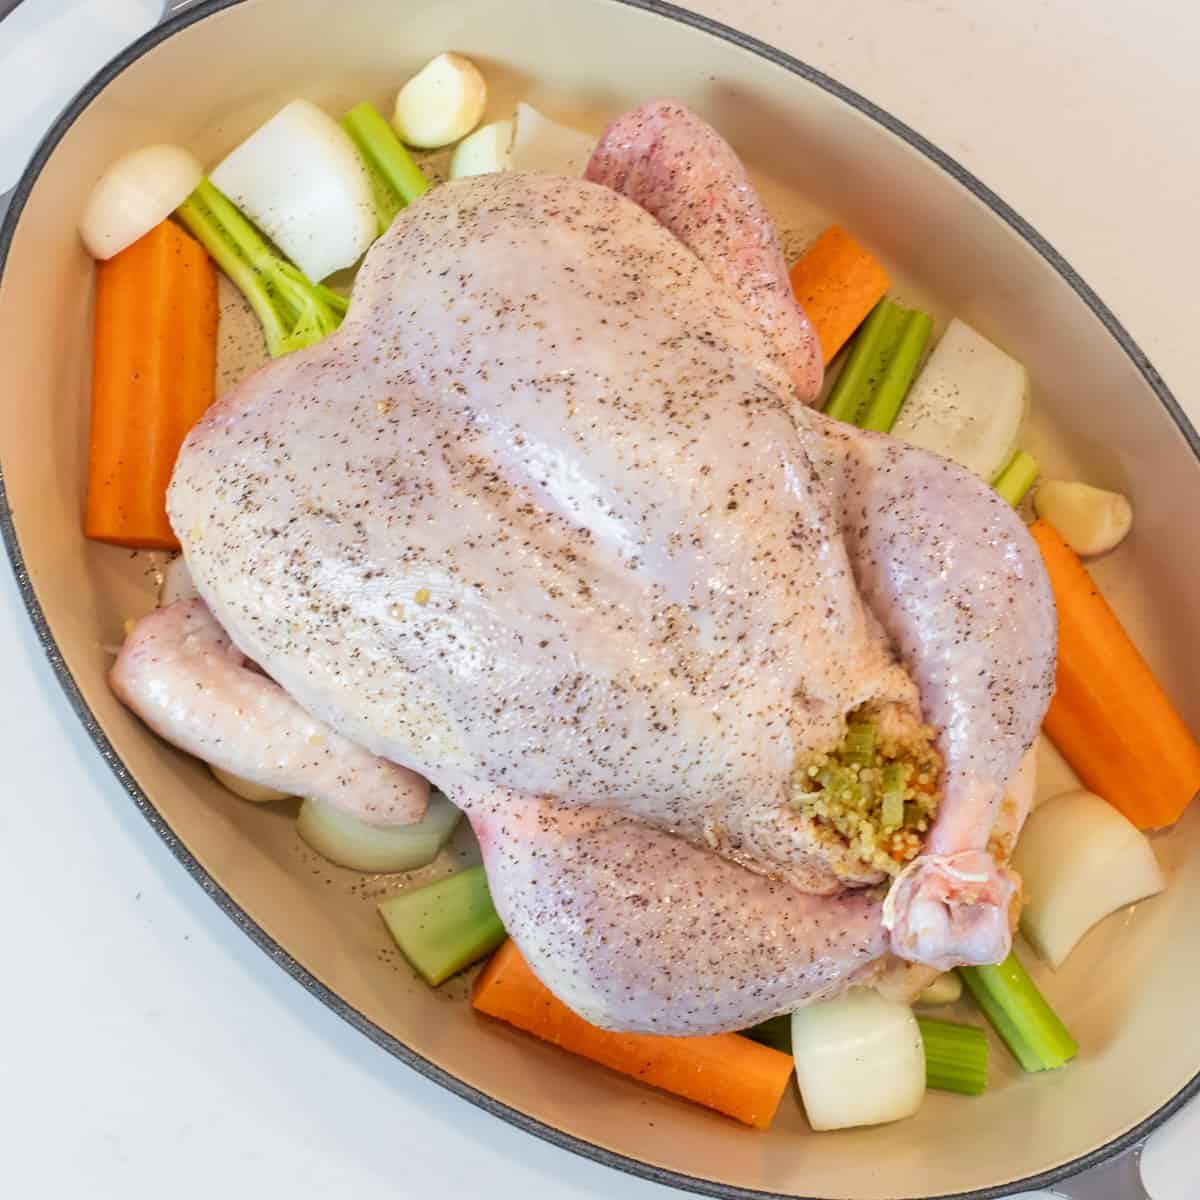 Stuffing chicken in a roasting dish with a bed of vegetables.